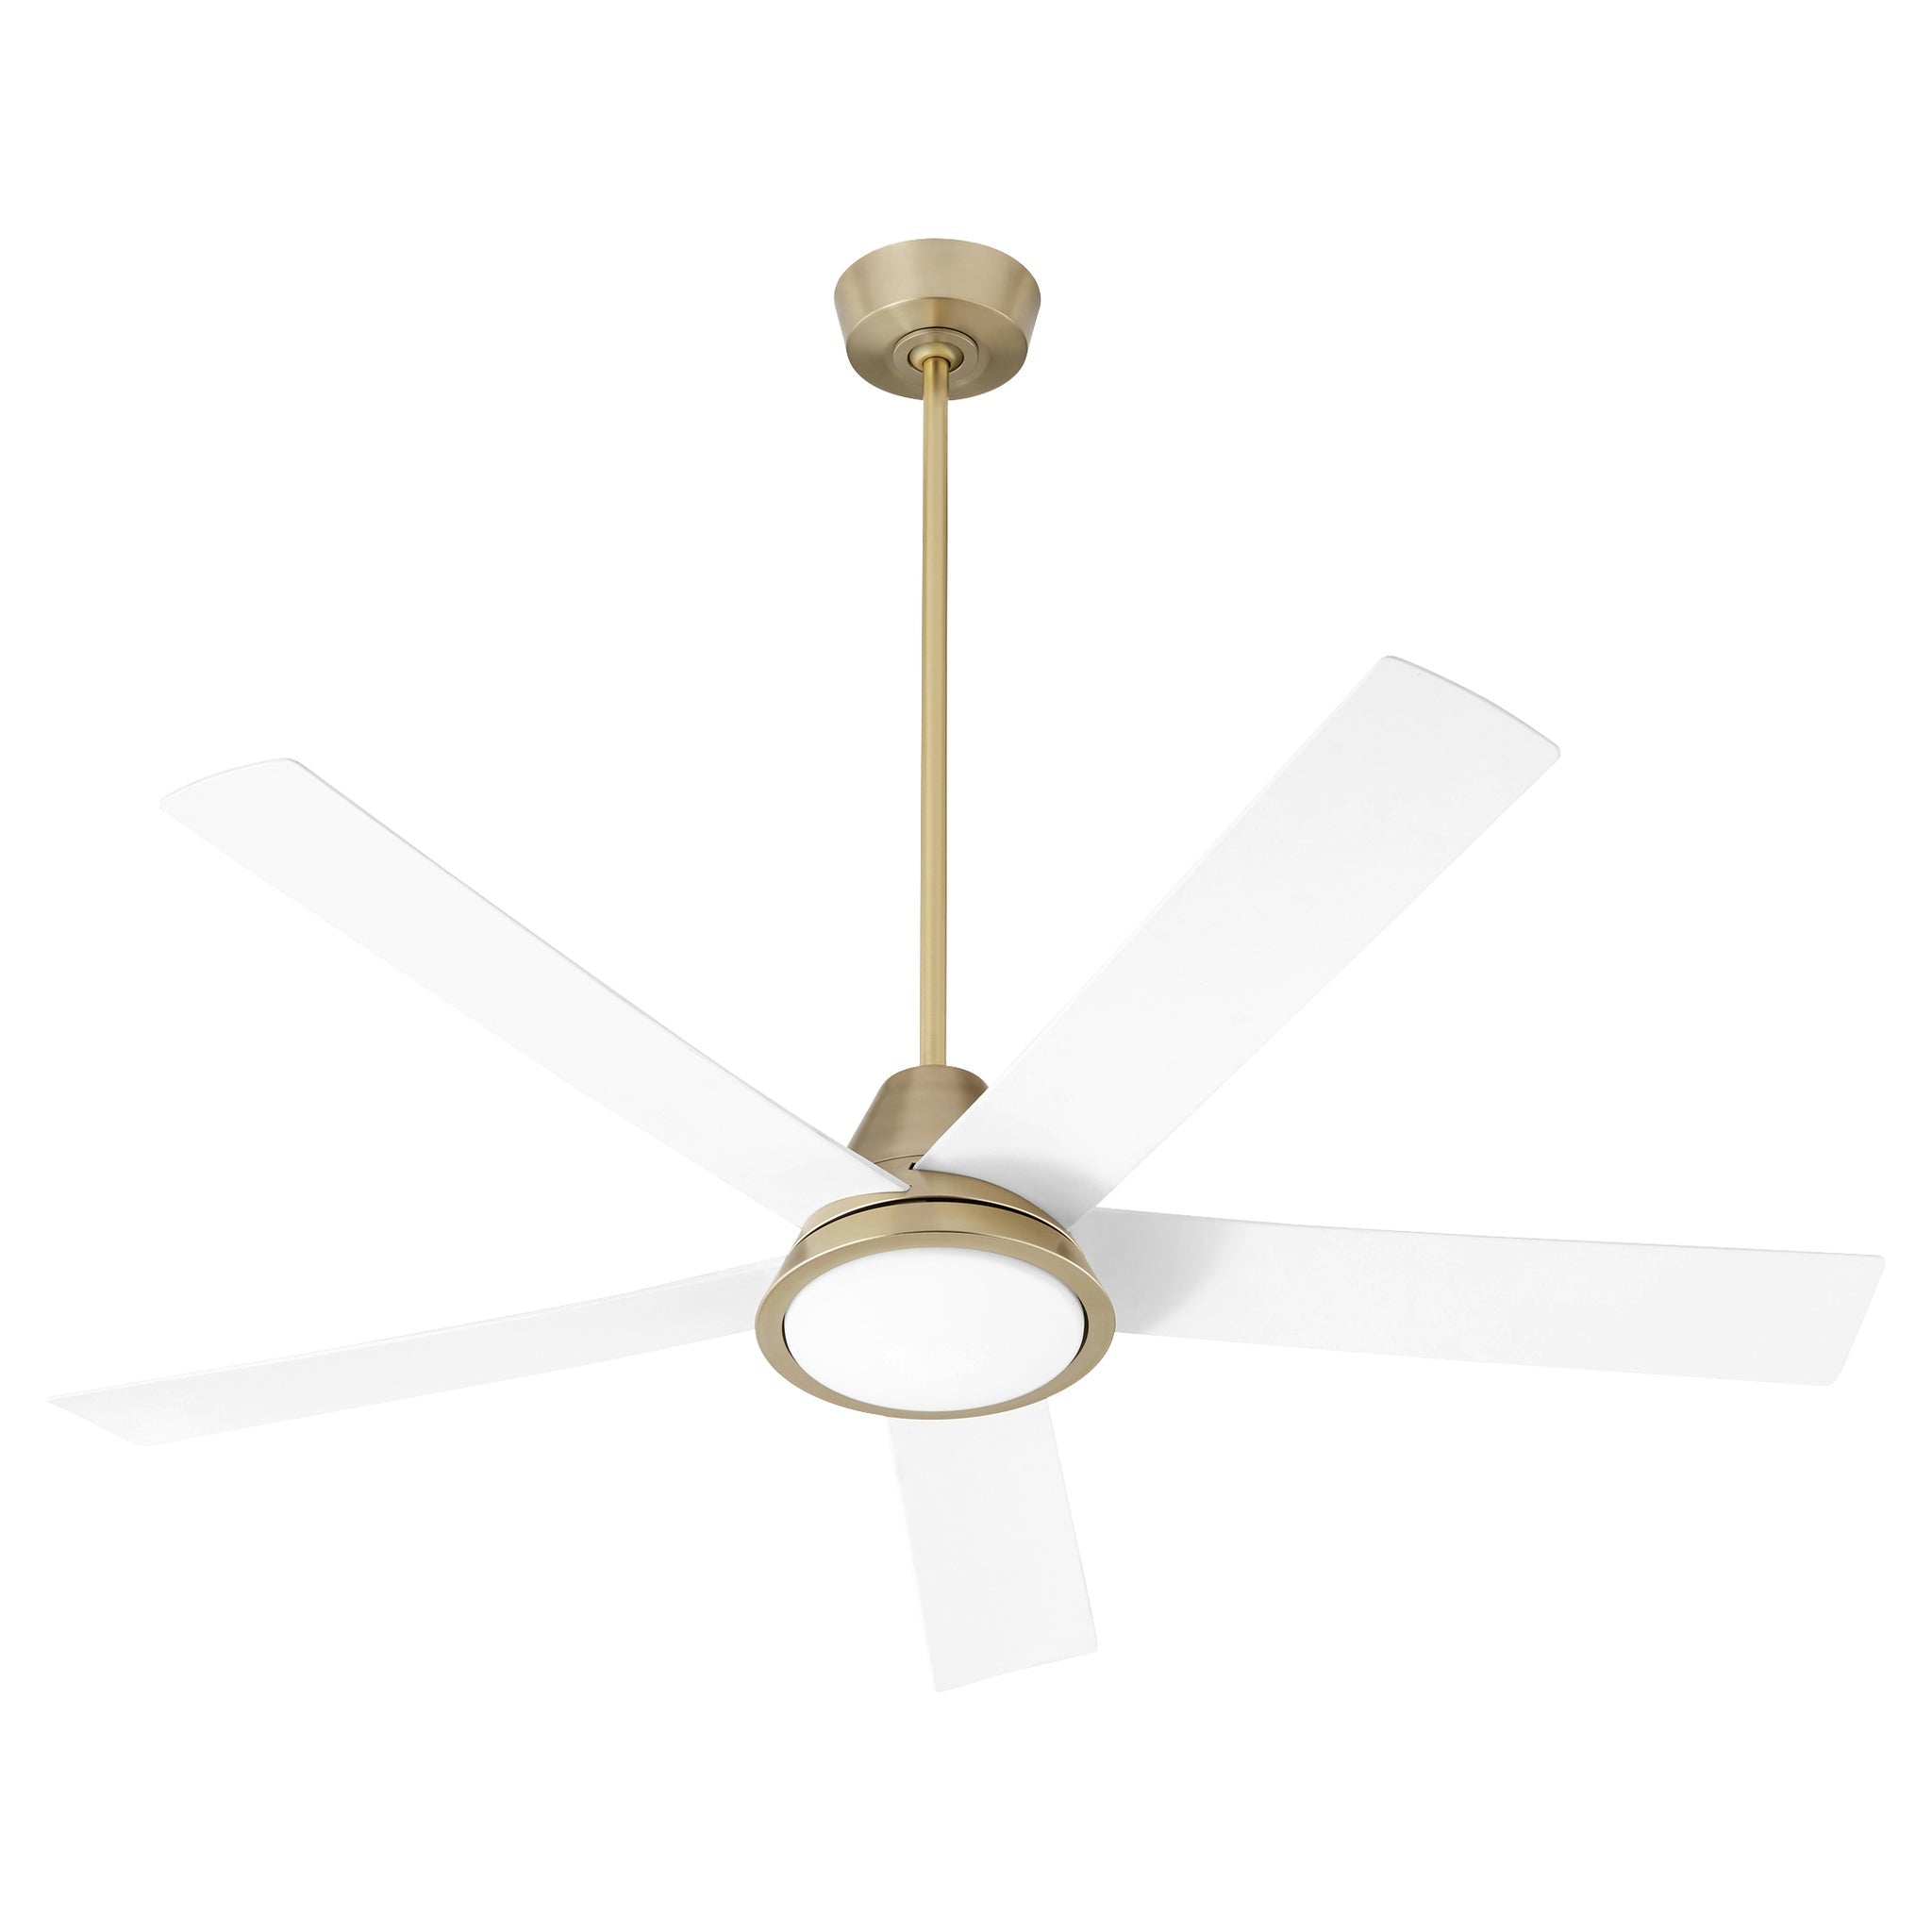 Oxygen TEMPLE 56 Inch Ceiling Fan with LED Light, Wet Rated, 6 Speeds Reversible with Wall Control